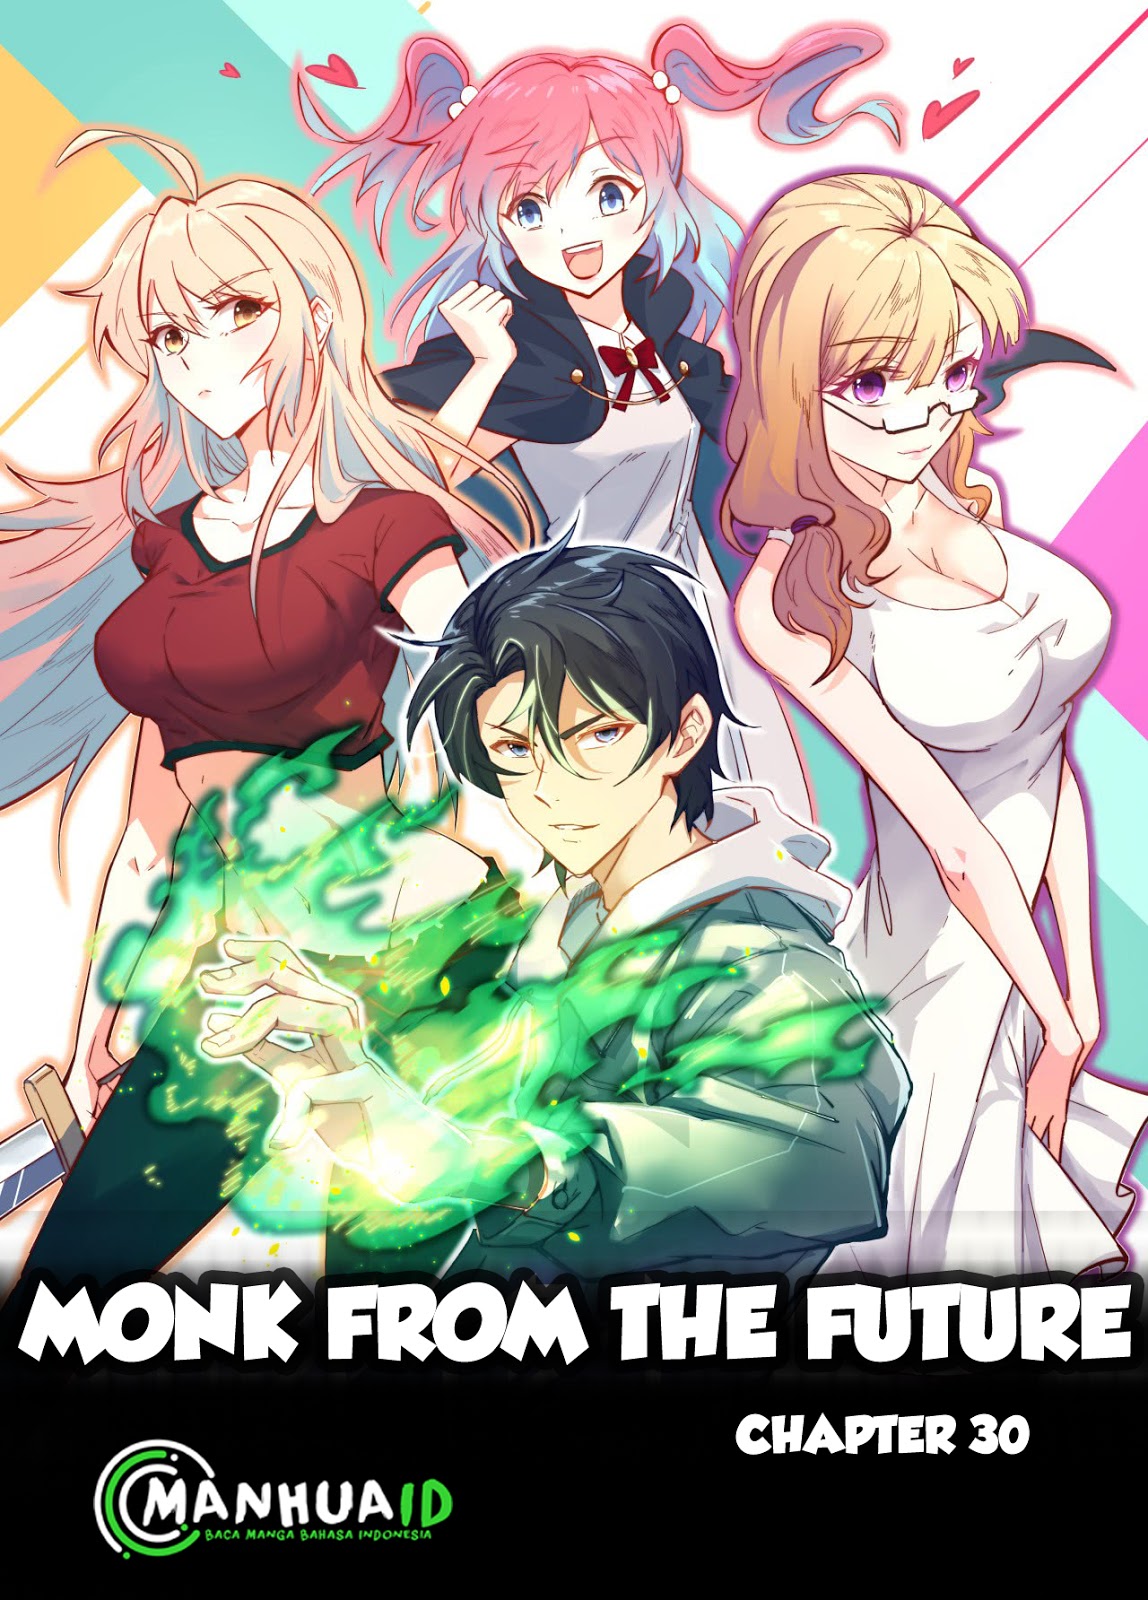 Monk From the Future Chapter 30